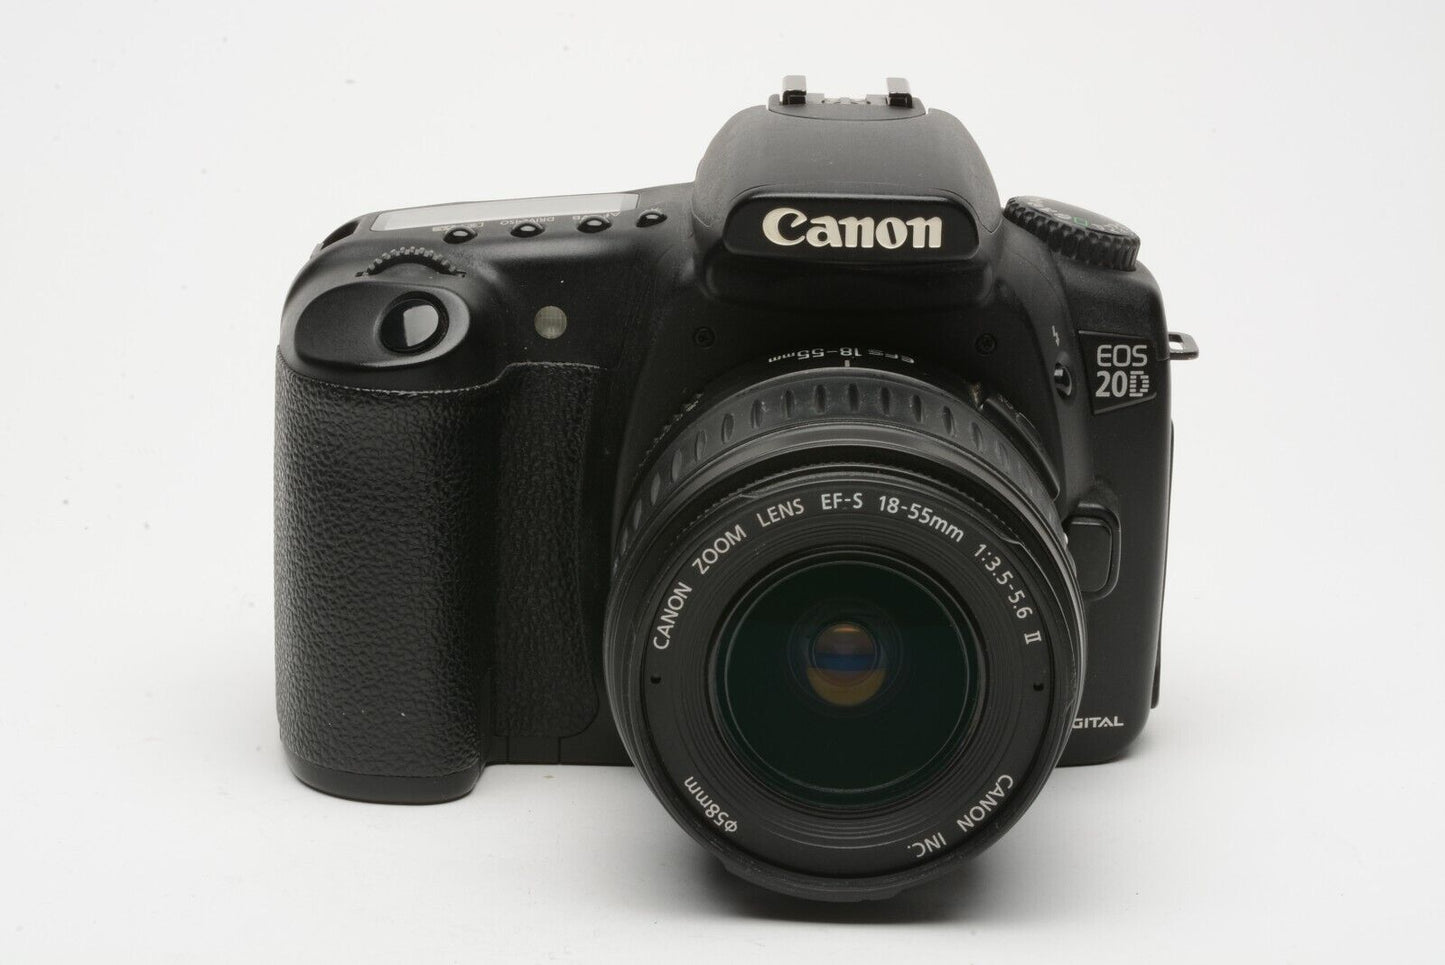 EXC++ CANON EOS 20D DSLR 8.2MP w/18-55mm ZOOM, BATT, CHARGER, STRAP, +16GB CF